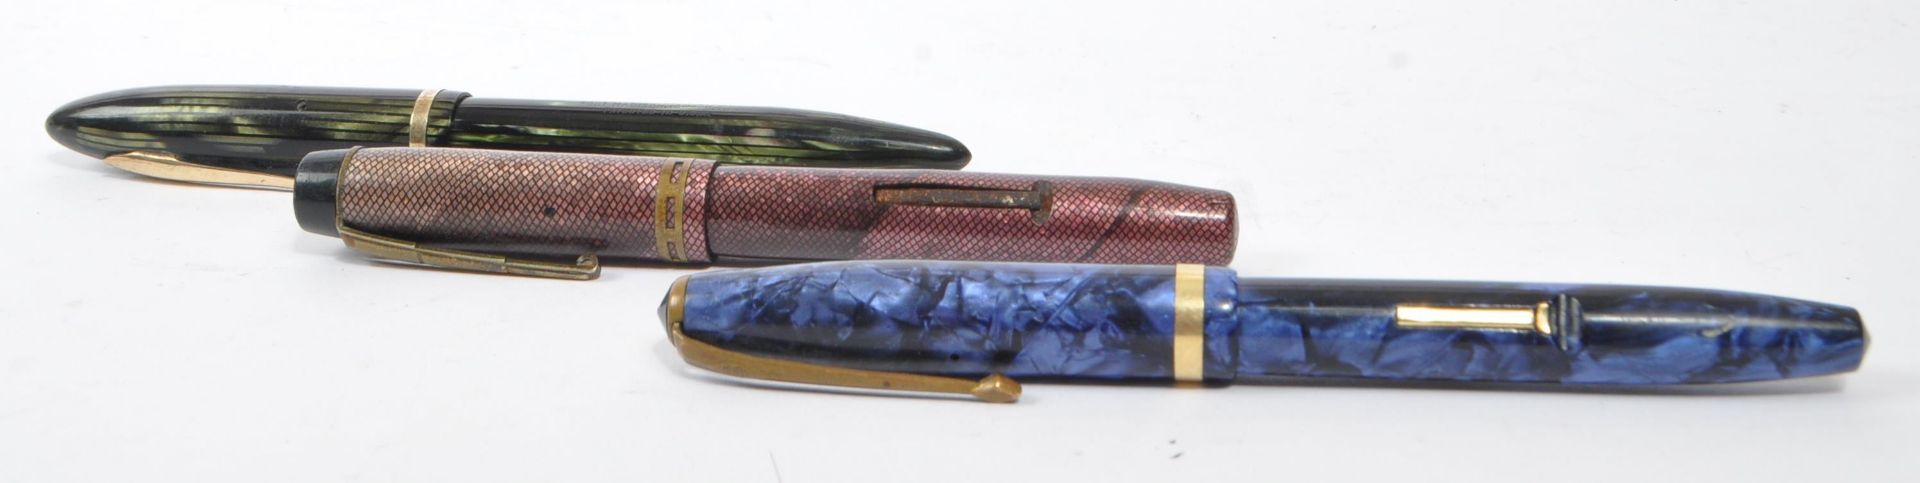 SHEAFFERS & BURNHAM - COLLECTION OF THREE FOUNTAIN PENS - Image 3 of 6